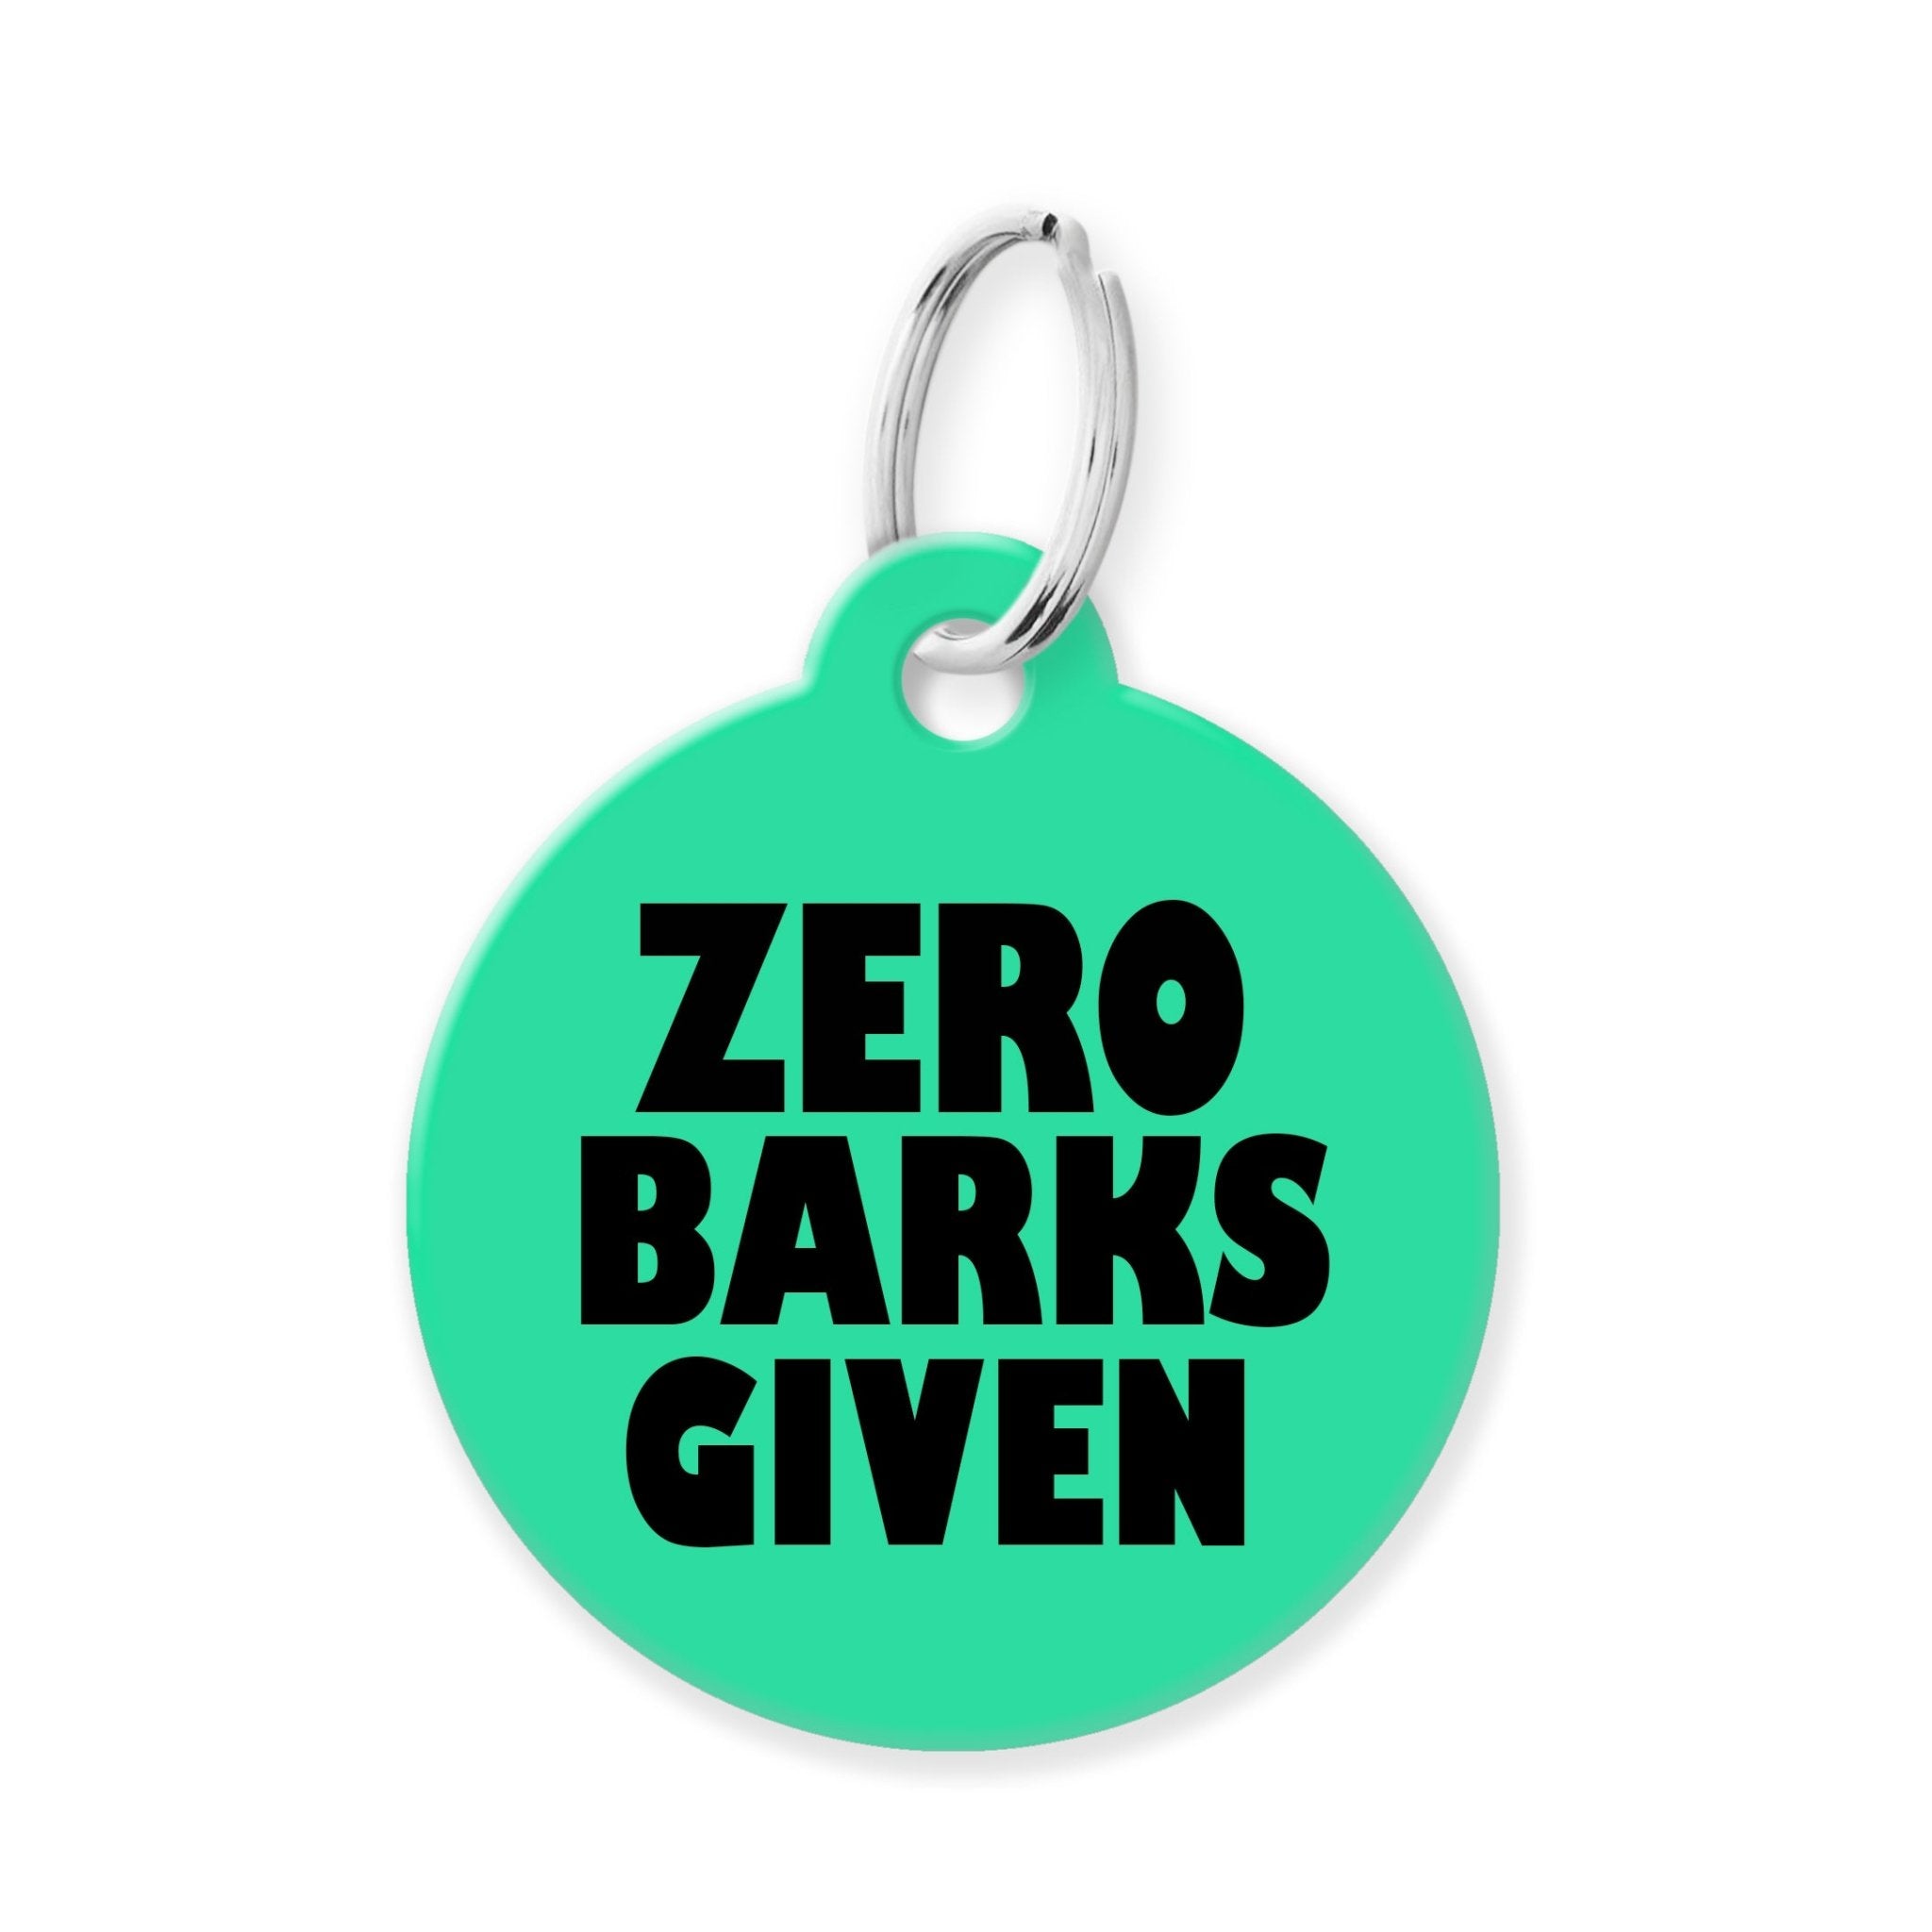 Zero Barks Given Funny Pet Tag - The Barking Mutt